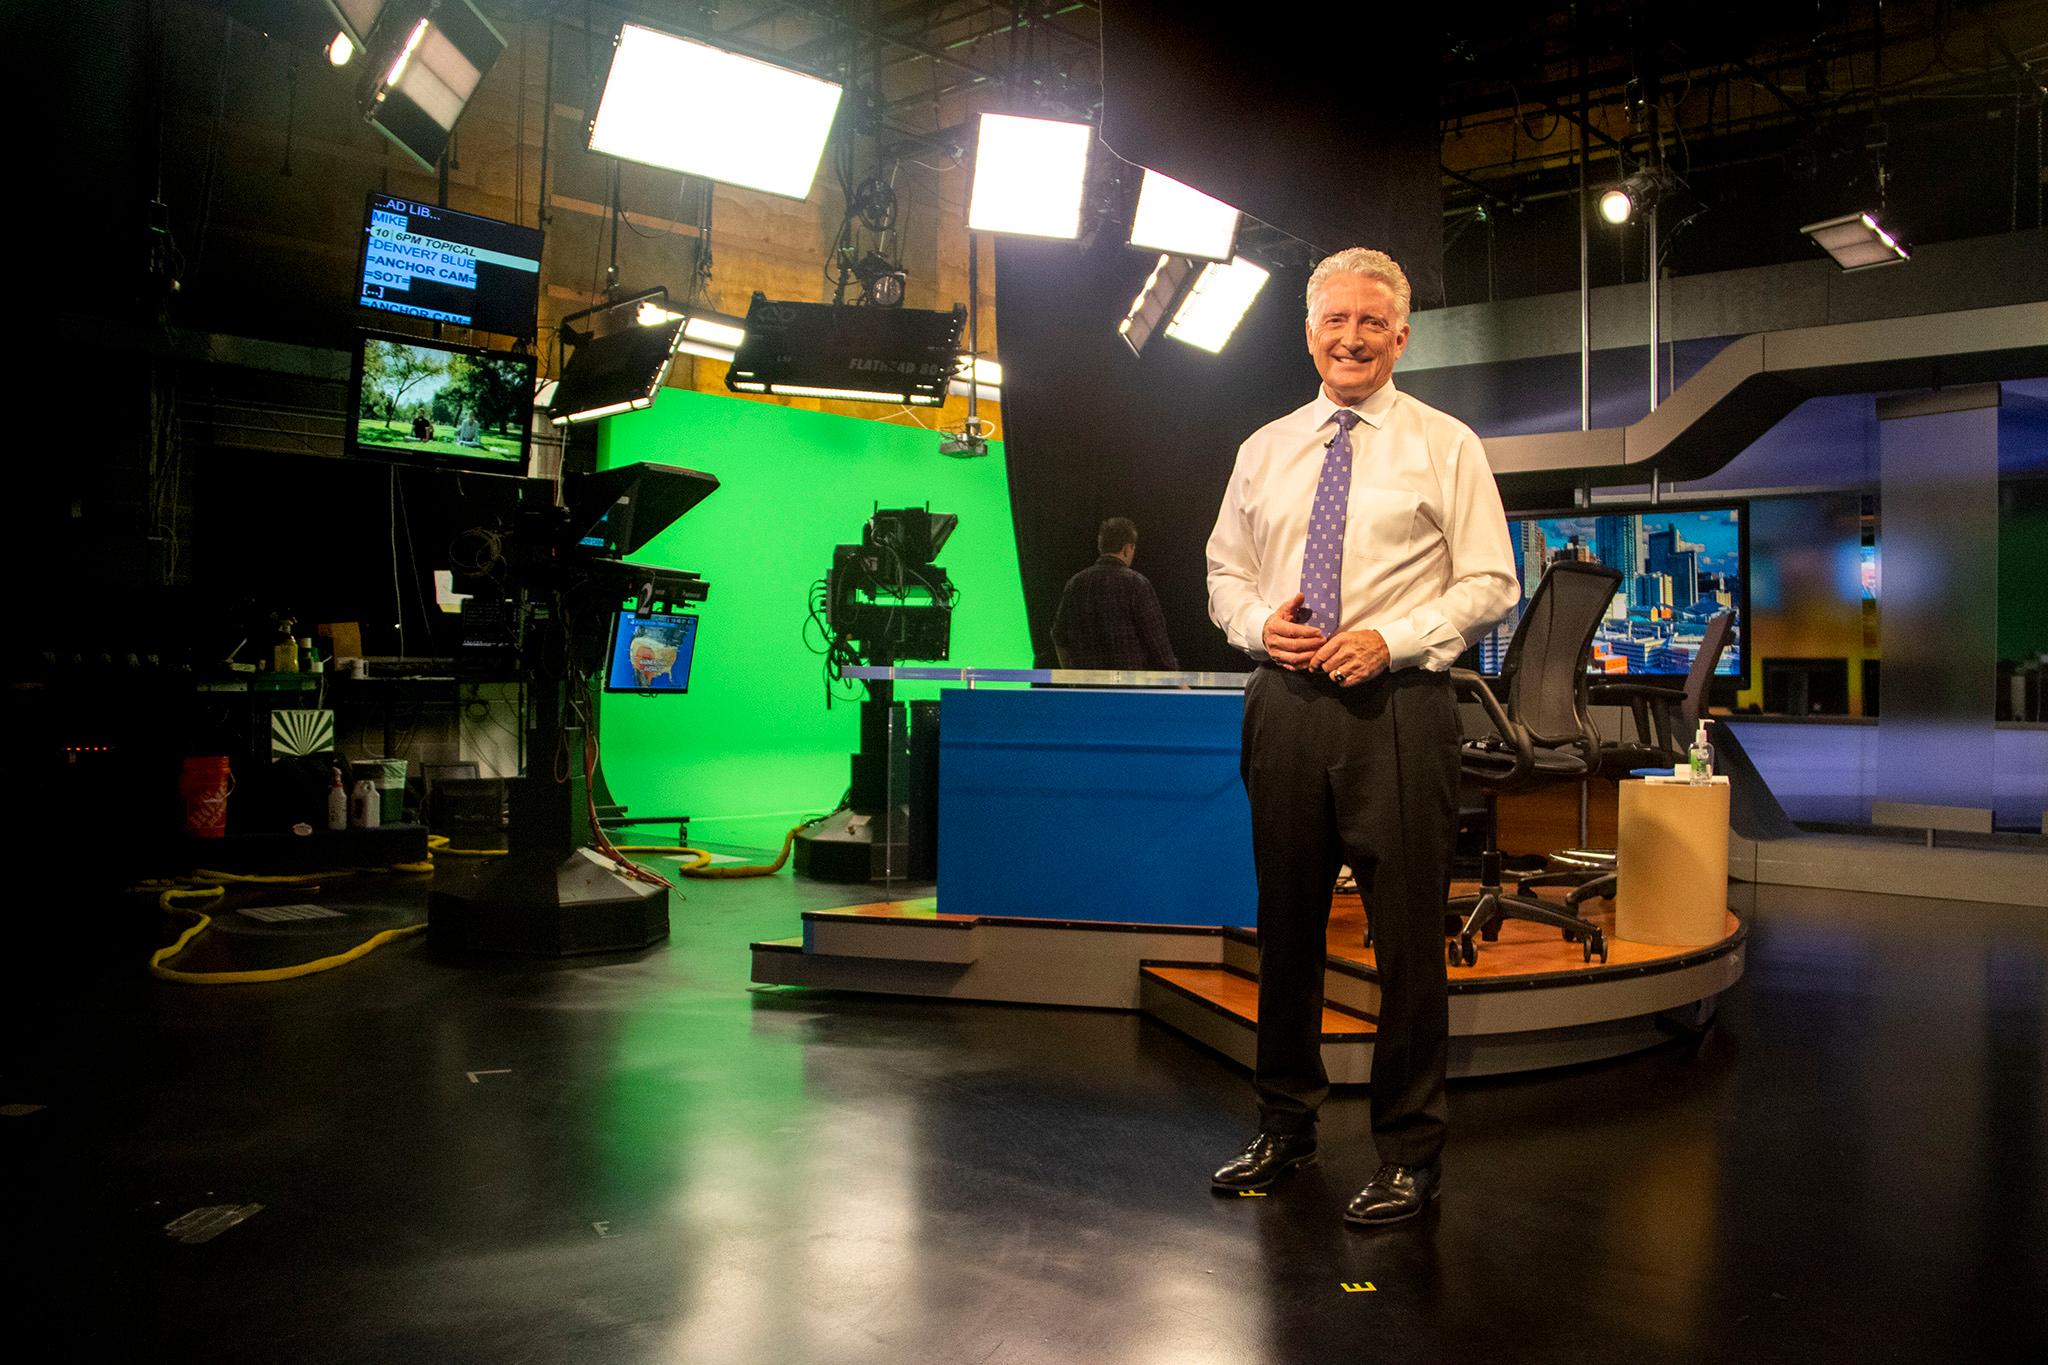 Mike Nelson at work in Denver7&#039;s studio. May 24, 2022.